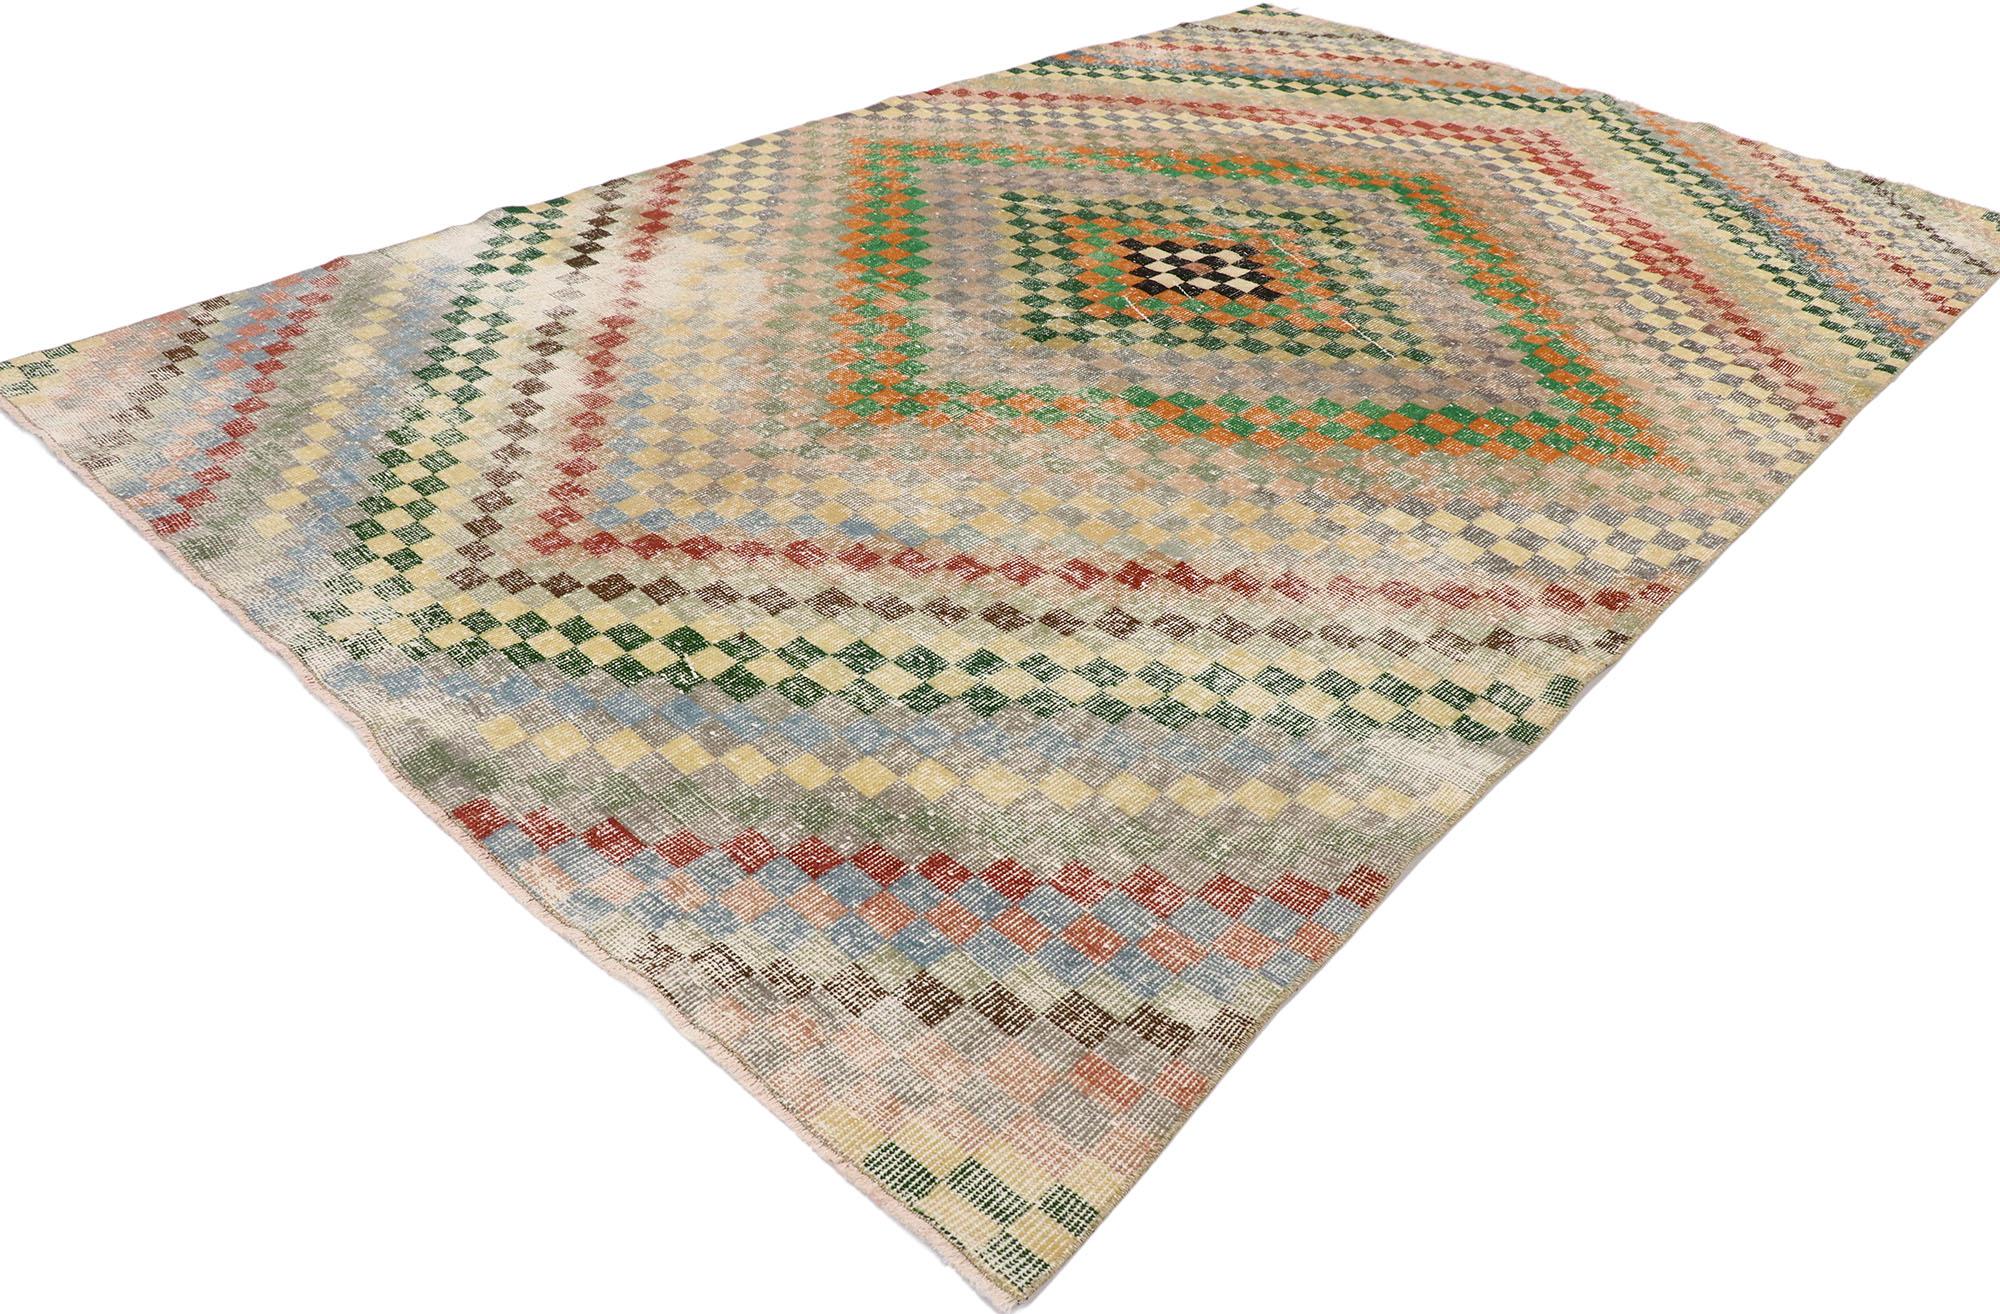 53337, distressed vintage Turkish Sivas rug with Rustic Mid-Century Modern Cubist style. This hand knotted wool distressed vintage Turkish Sivas rug features an all-over checkered diamond pattern comprised of rows of multicolored cubes. Each row of